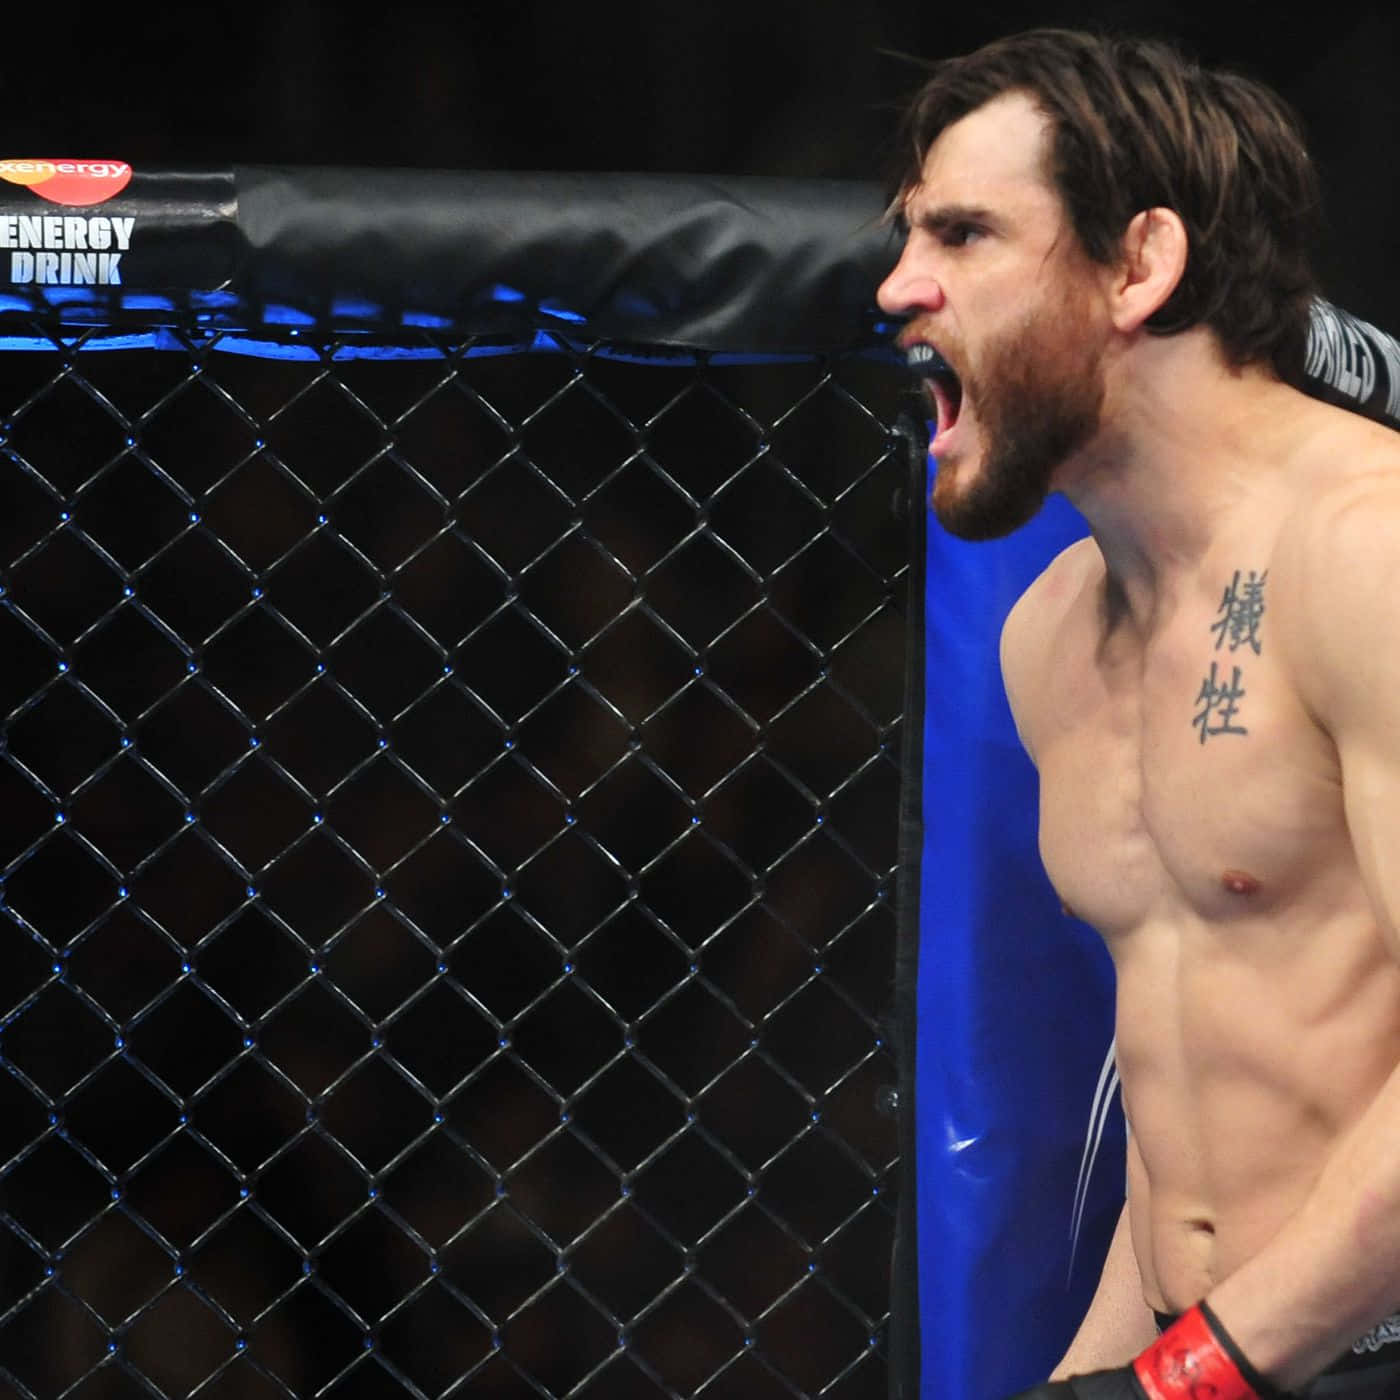 Jonfitch Sidovy Skrikande - (this Would Be A Potential Title For A Computer Or Mobile Wallpaper Featuring A Side View Of Jon Fitch, Possibly Mid-scream.) Wallpaper